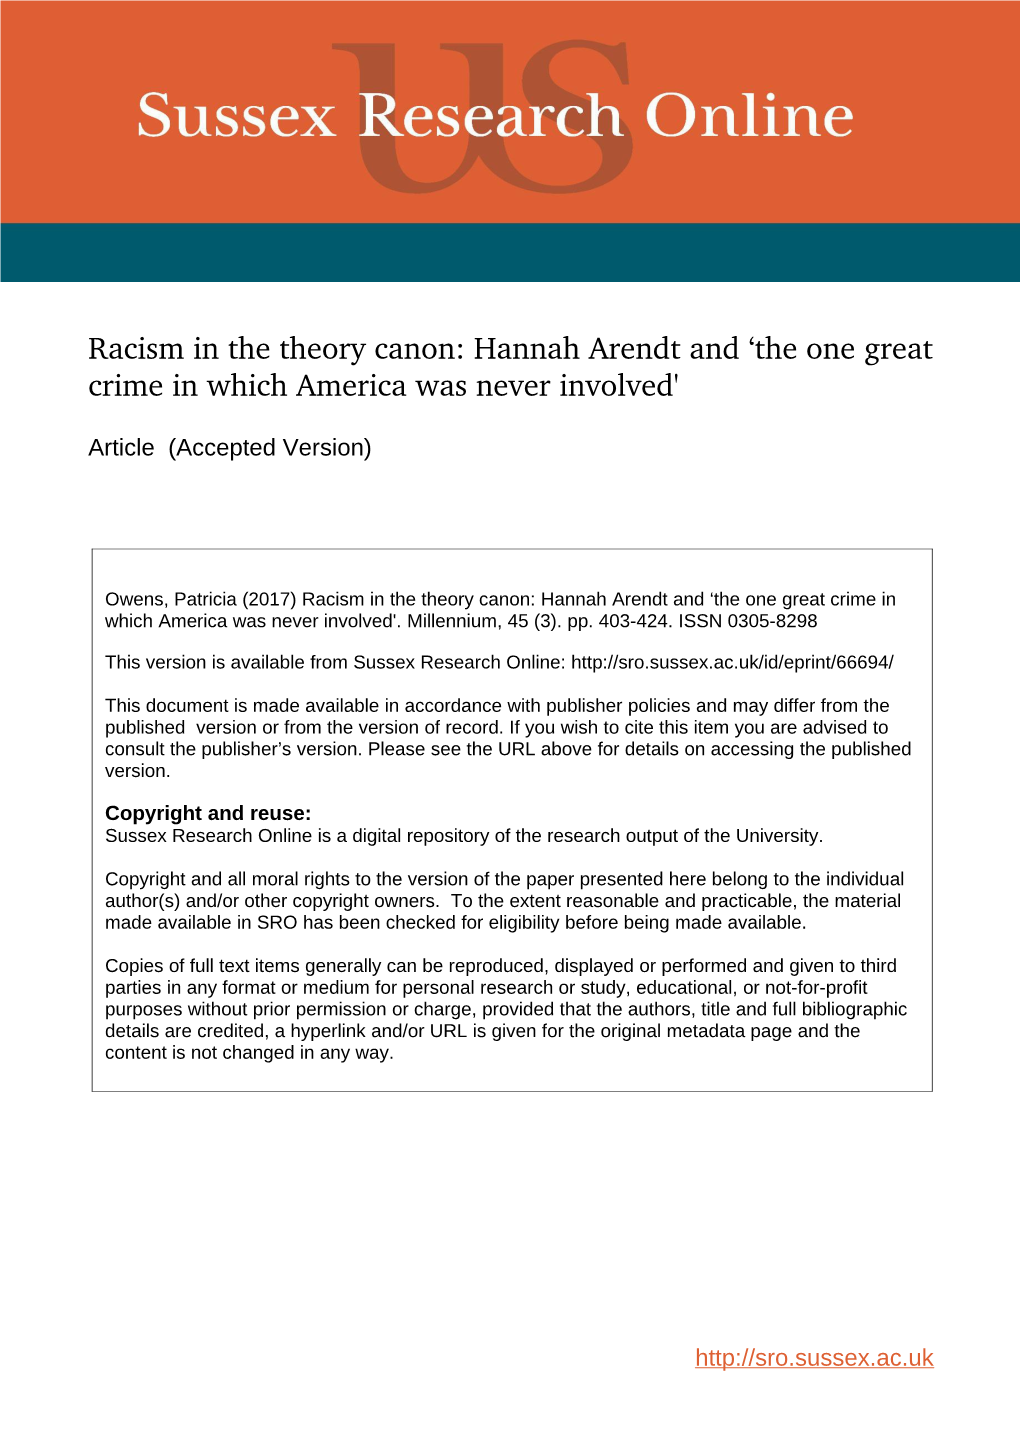 Hannah Arendt and ‘The One Great Crime in Which America Was Never Involved'